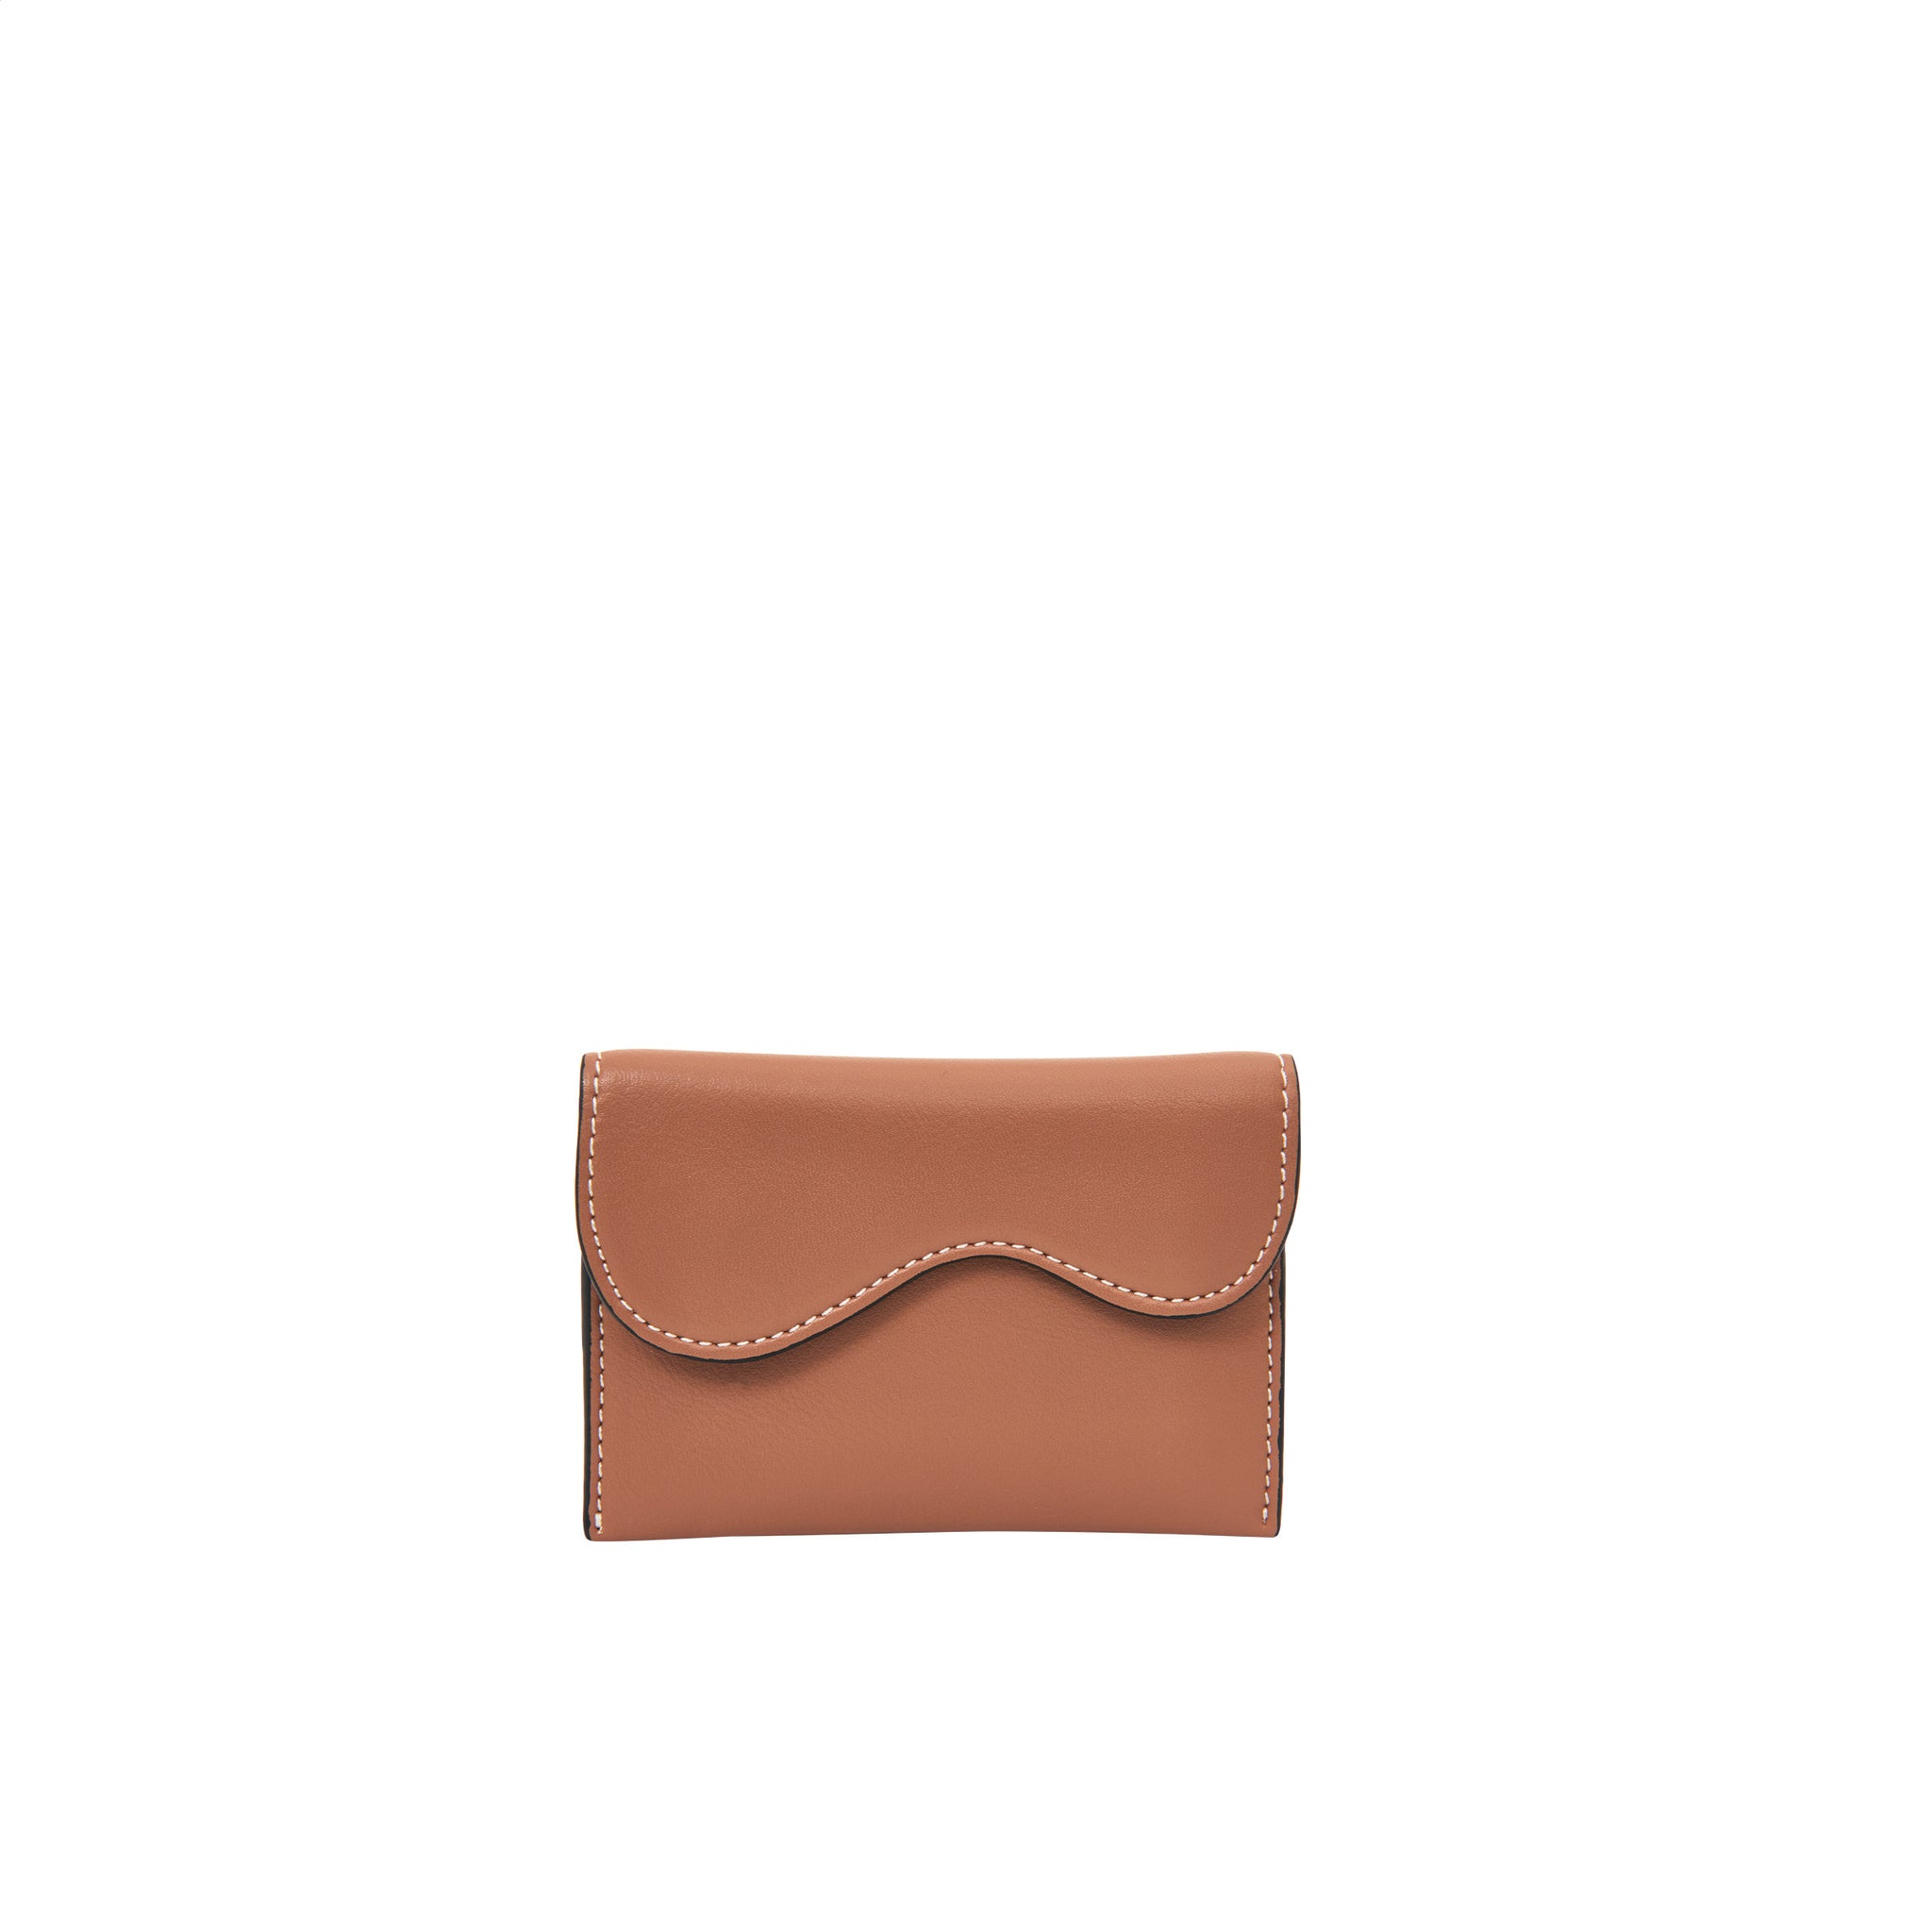 WALLET WAVE SOFT STRUCTURE - HUSH BROWN